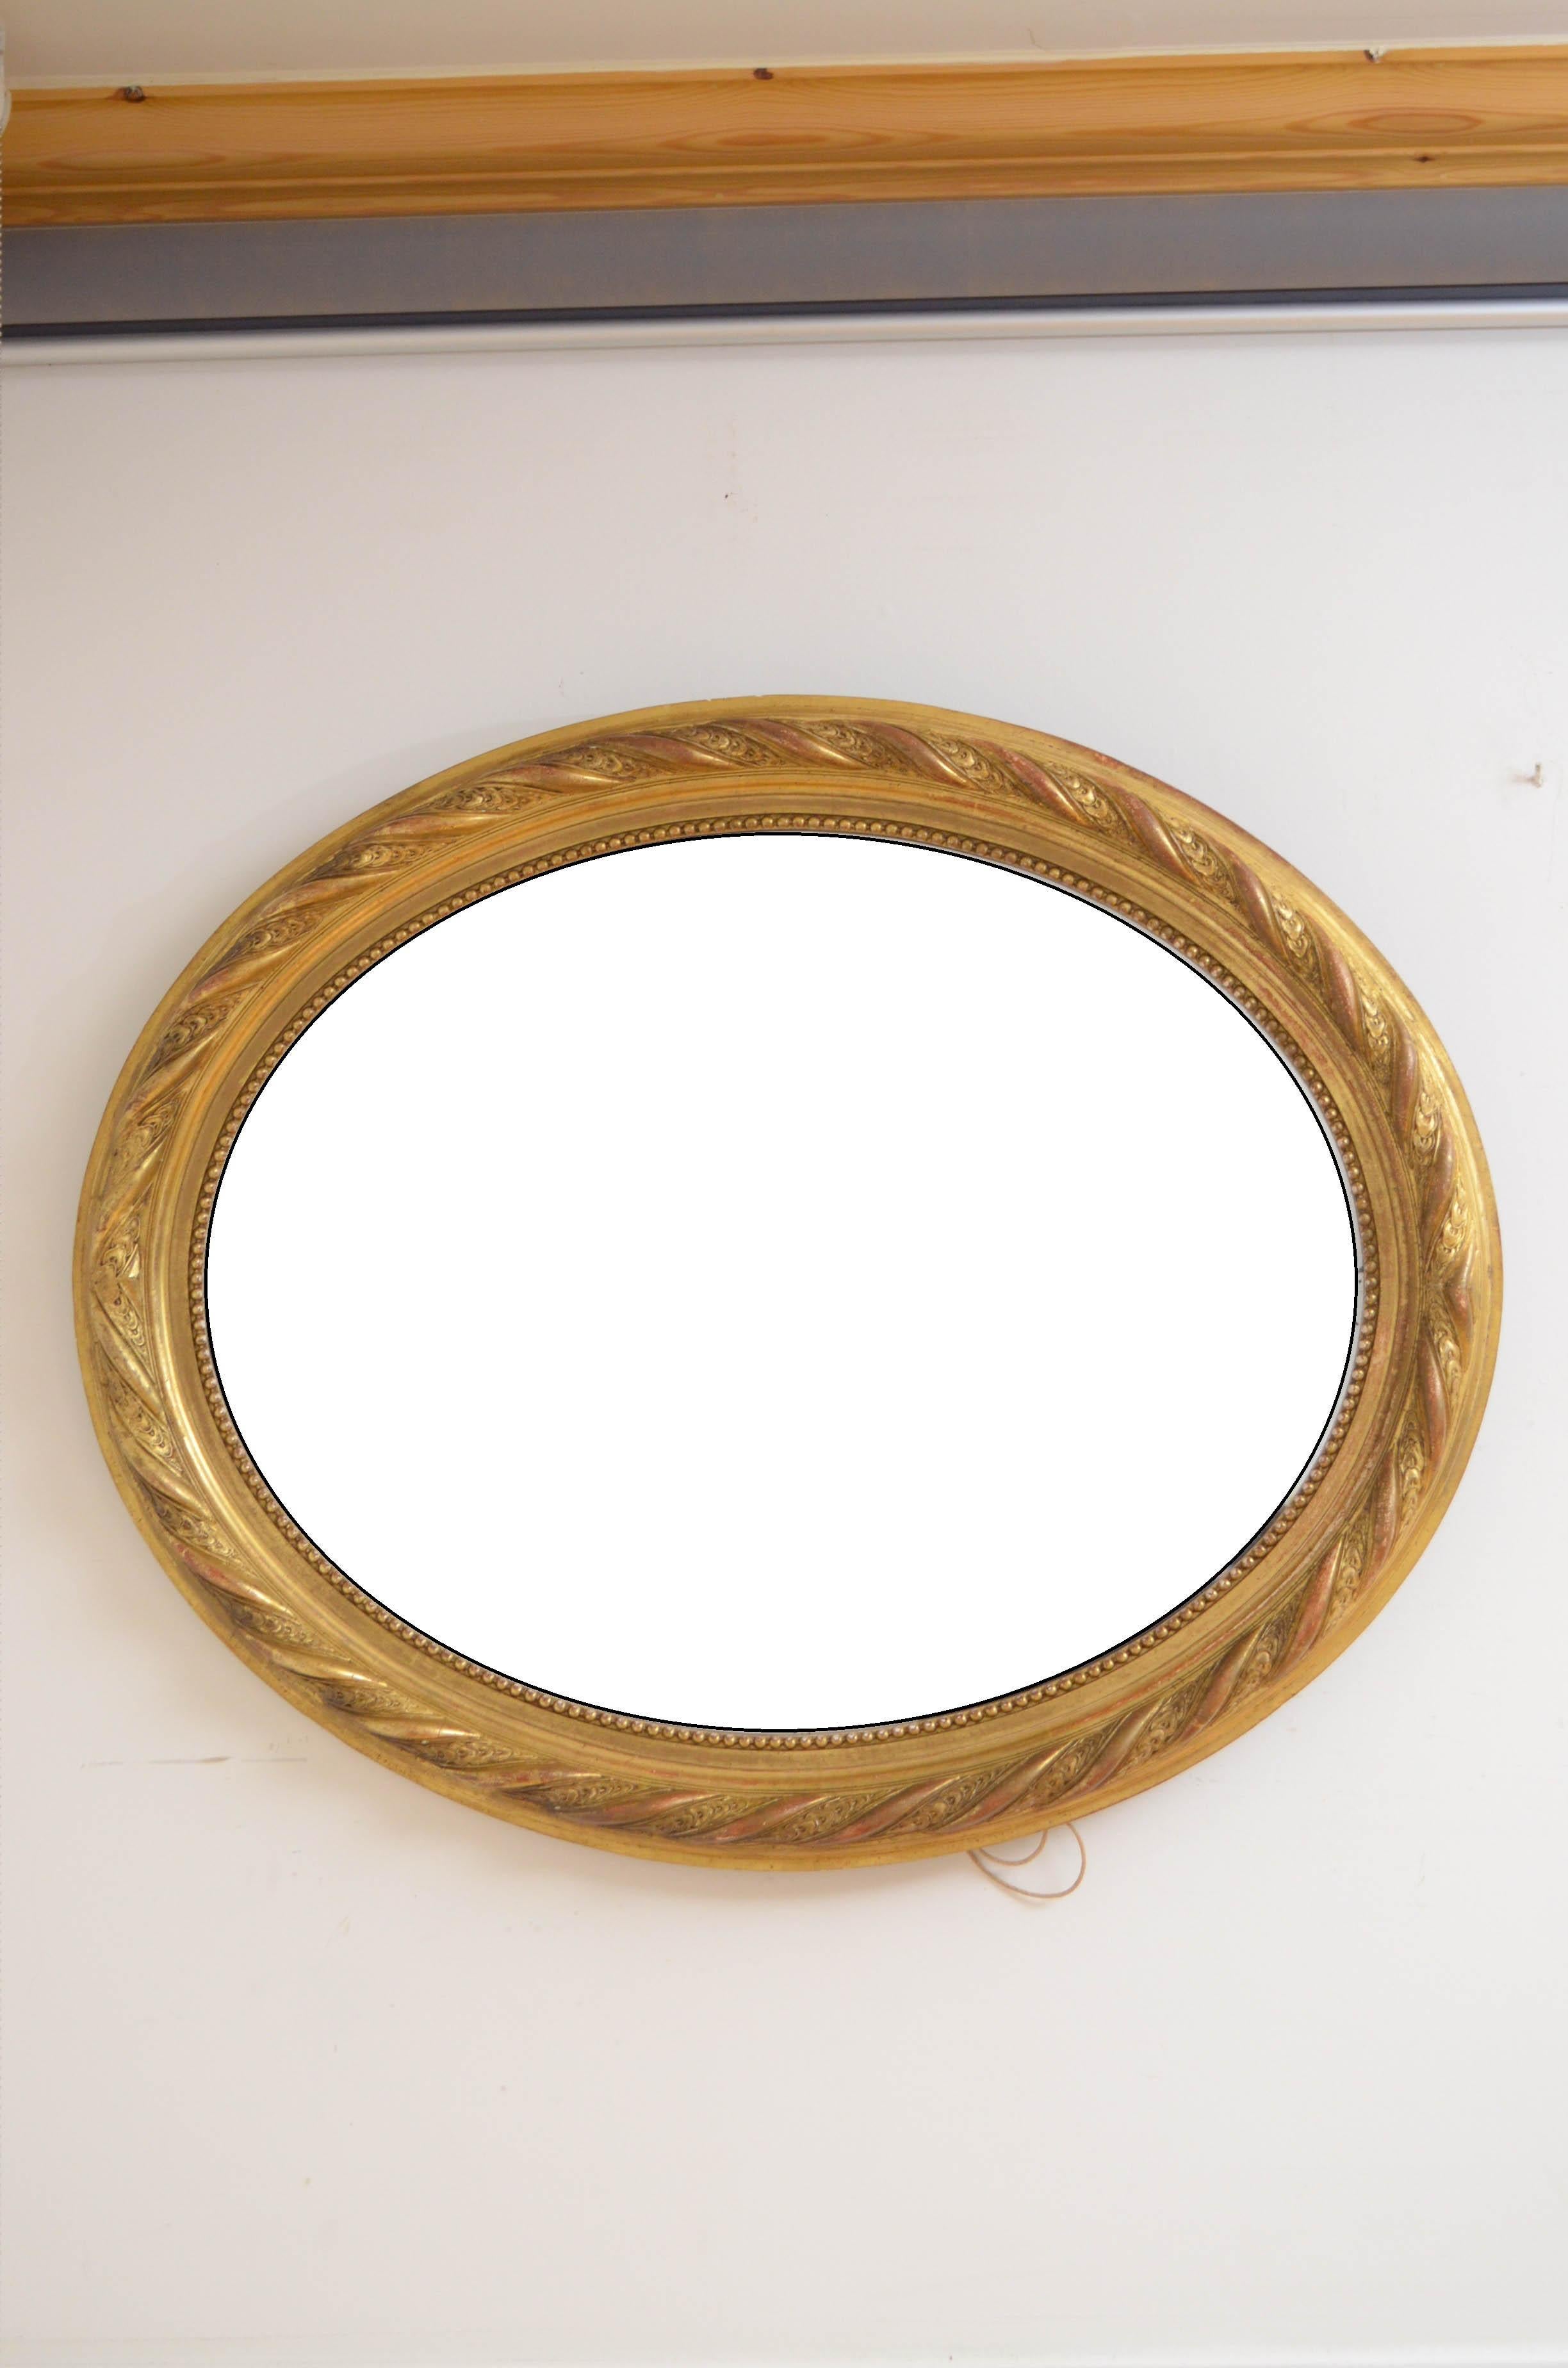 0583 Superb 19th century gilded wall mirror, having original bevelled edge glass with some foxing in beautifully carved and beaded giltwood frame. This antique mirror retains its original glass, original gilt and backboards, all in home ready